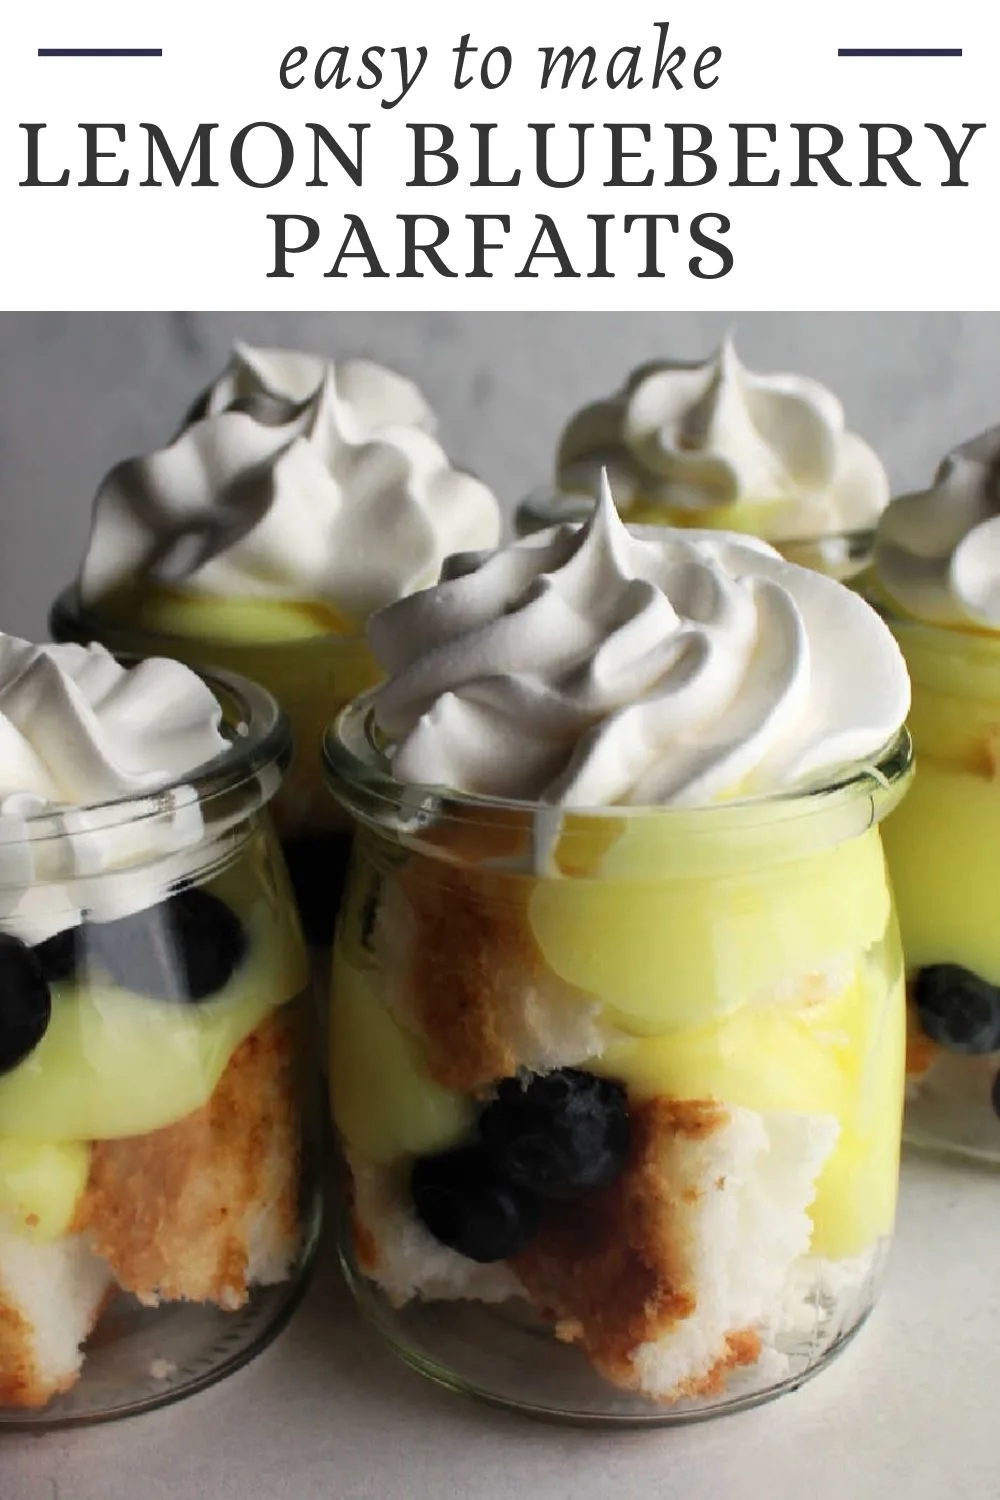 Lemon blueberry parfaits are perfect for spring or as a light Easter dessert. Make as one big trifle or as individual trifles. Lemon. blueberries and angel food are a match made in heaven! 